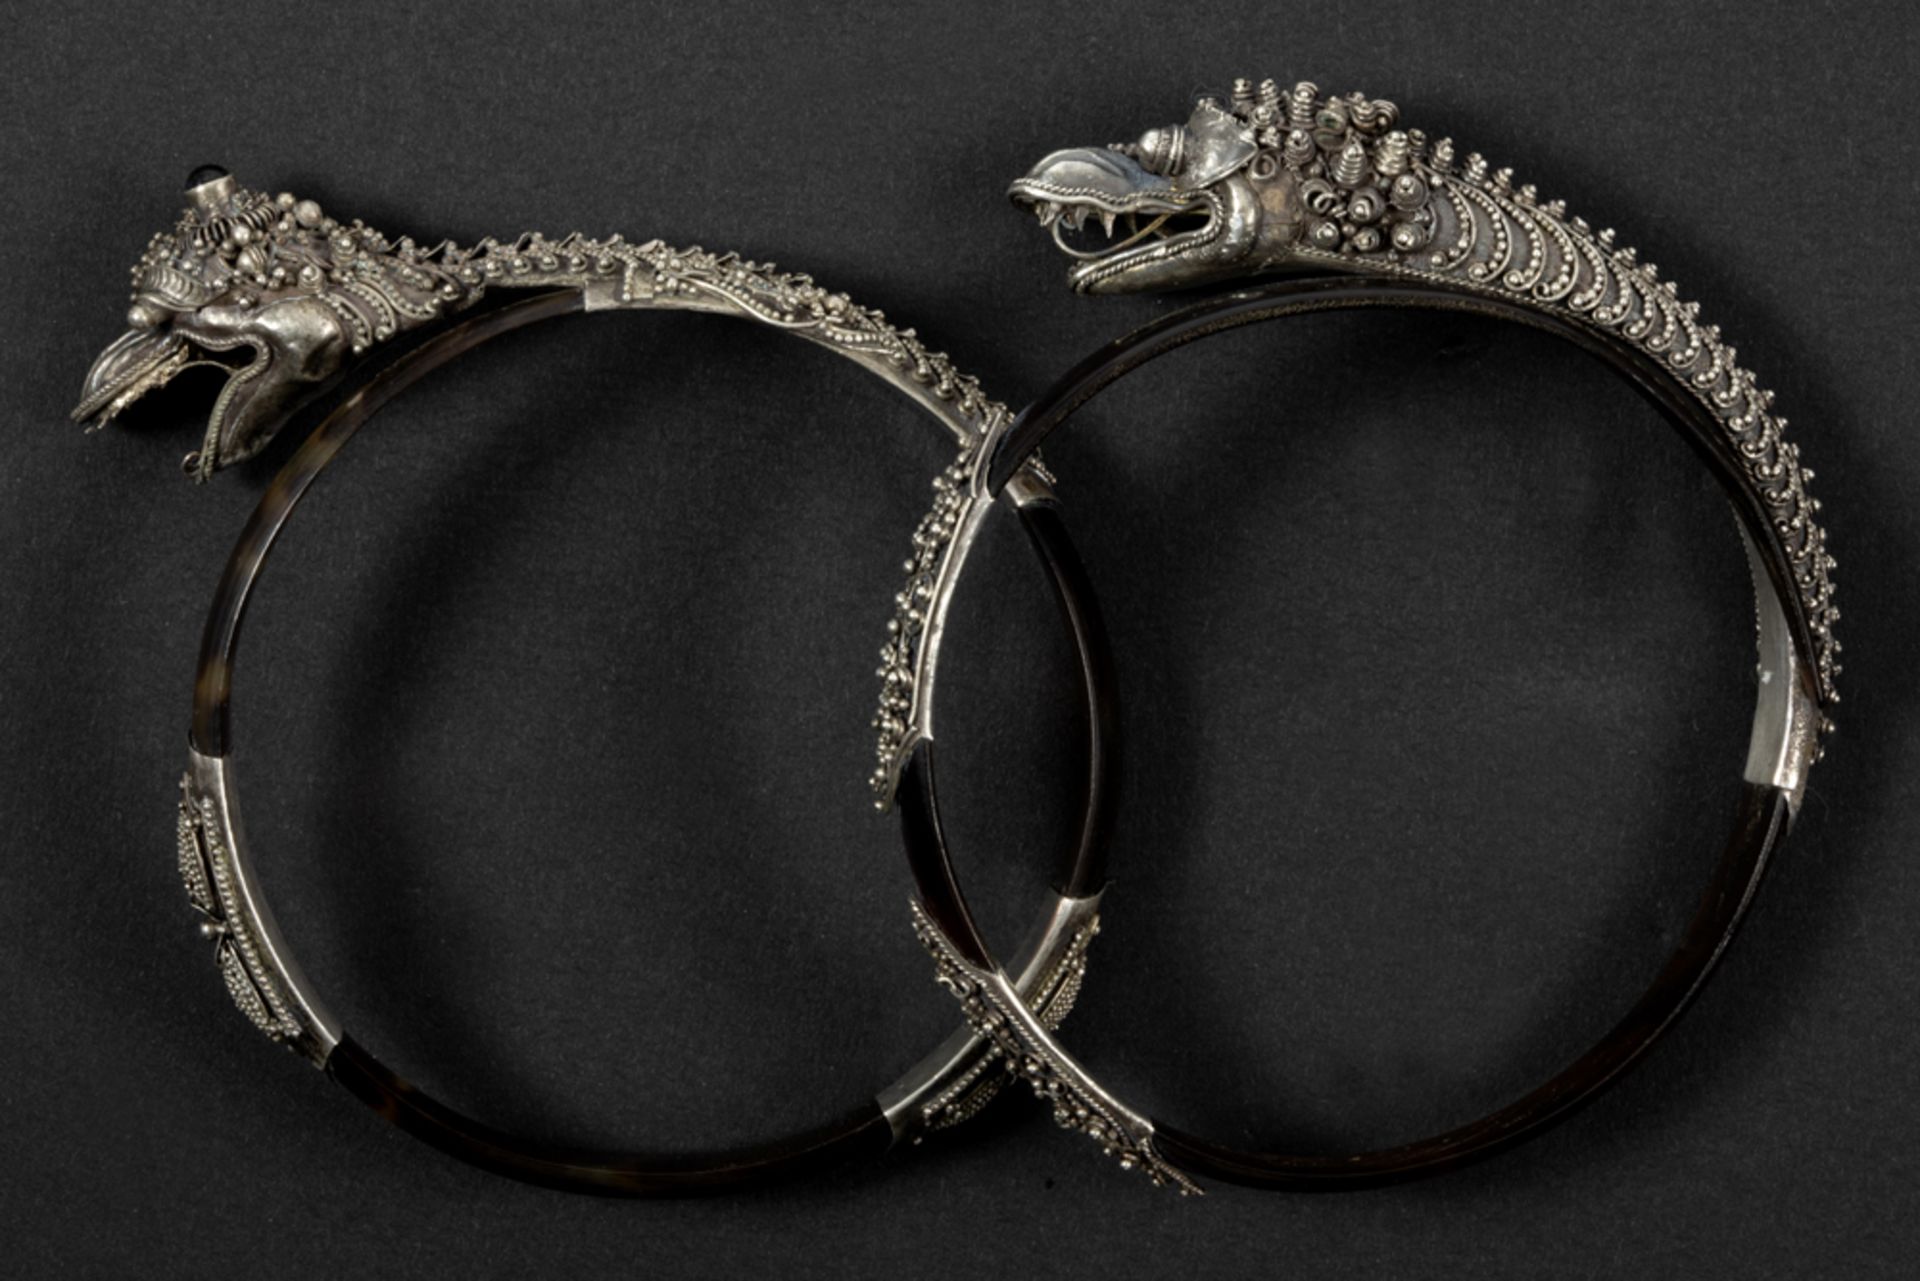 two Far East (presumably Chinese) bangles each with a silver filigrees mounting with dragon's - Image 3 of 3